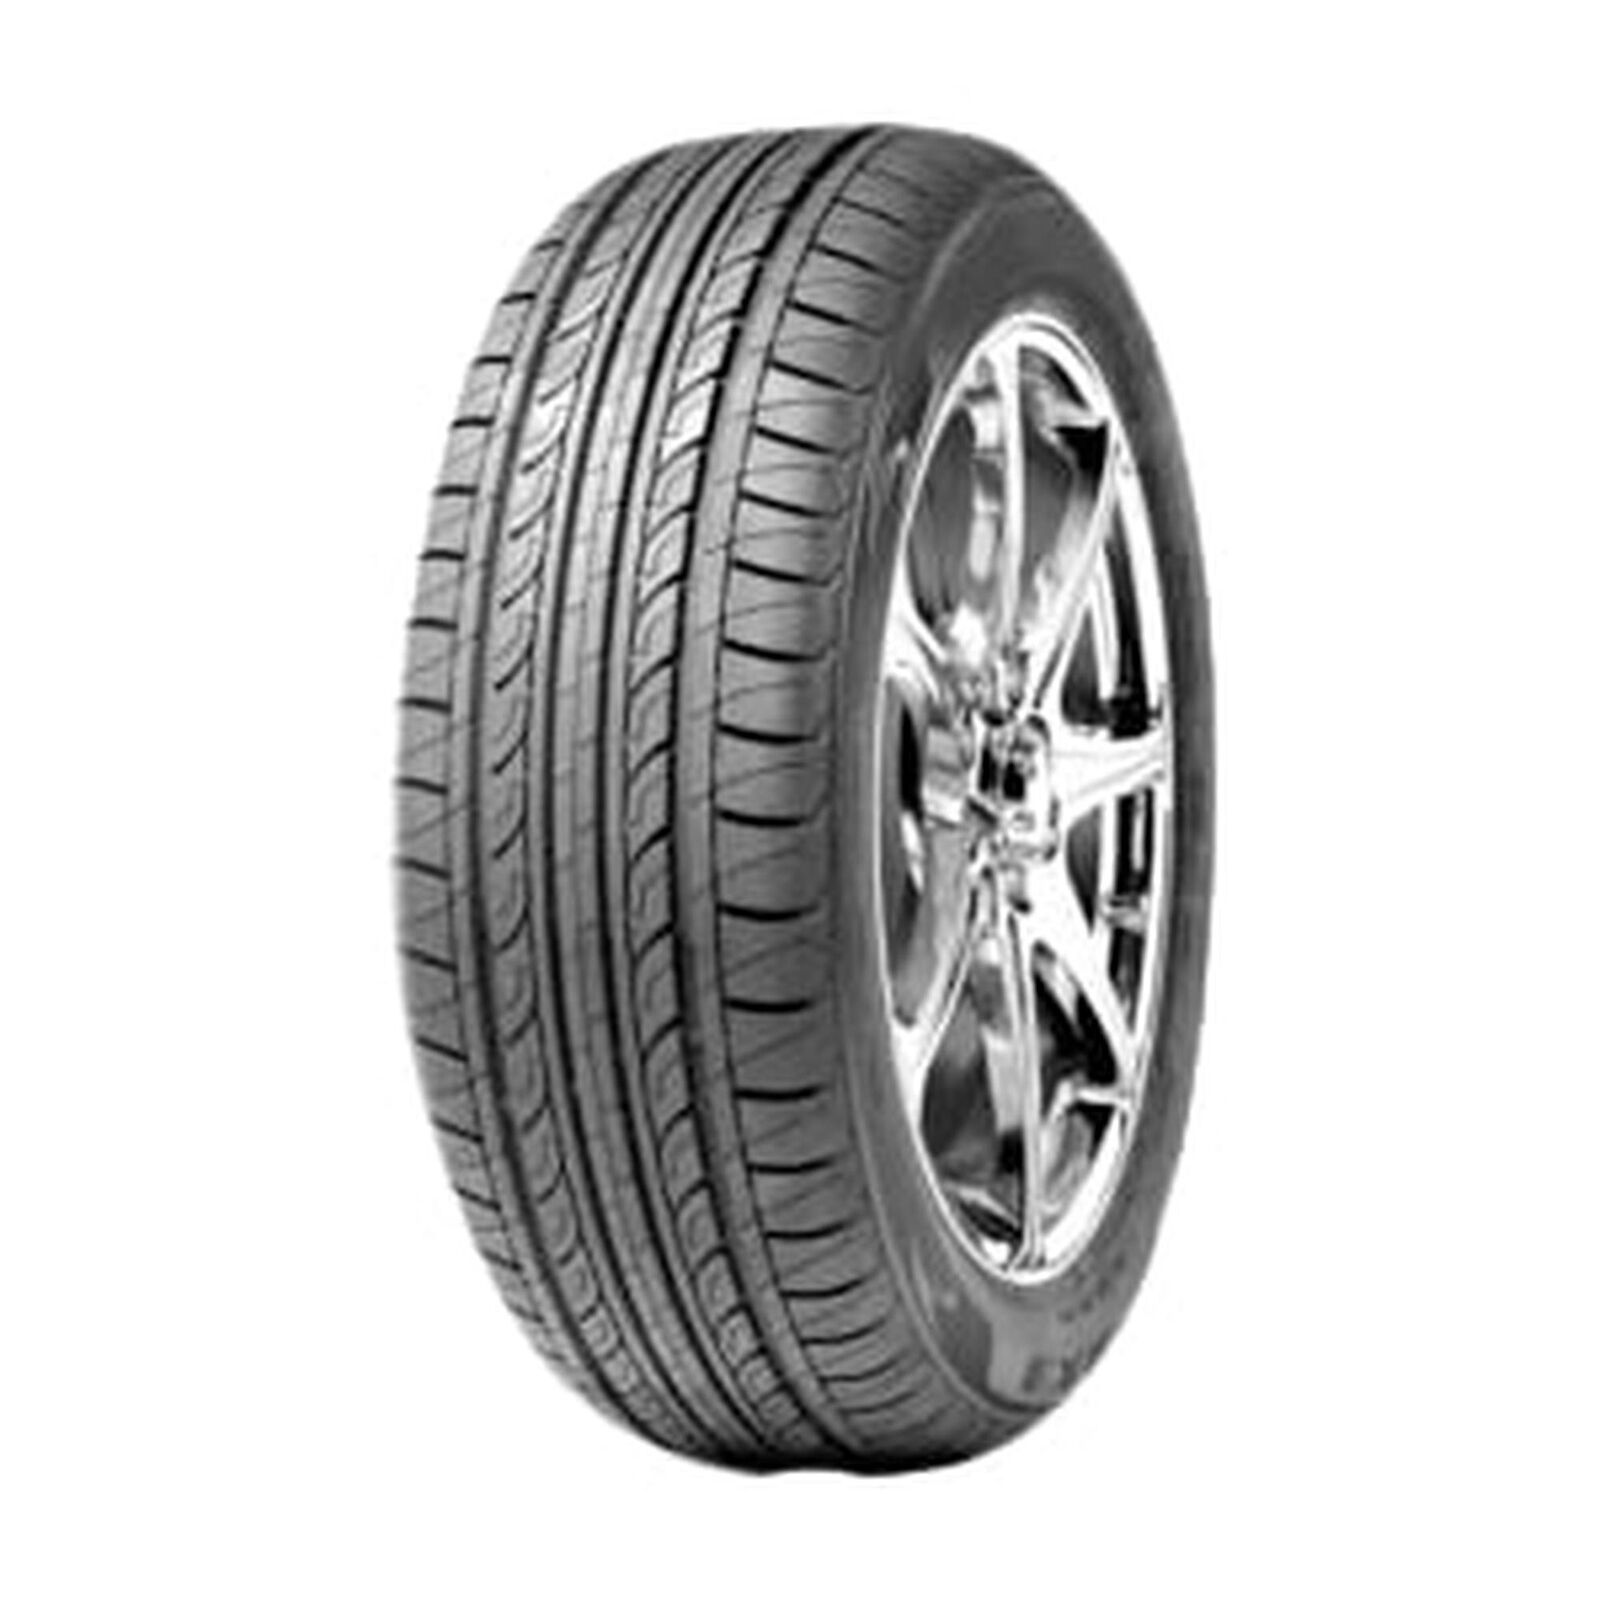 1 New Ardent Hp Rx3  - 185/55r15 Tires 1855515 185 55 15